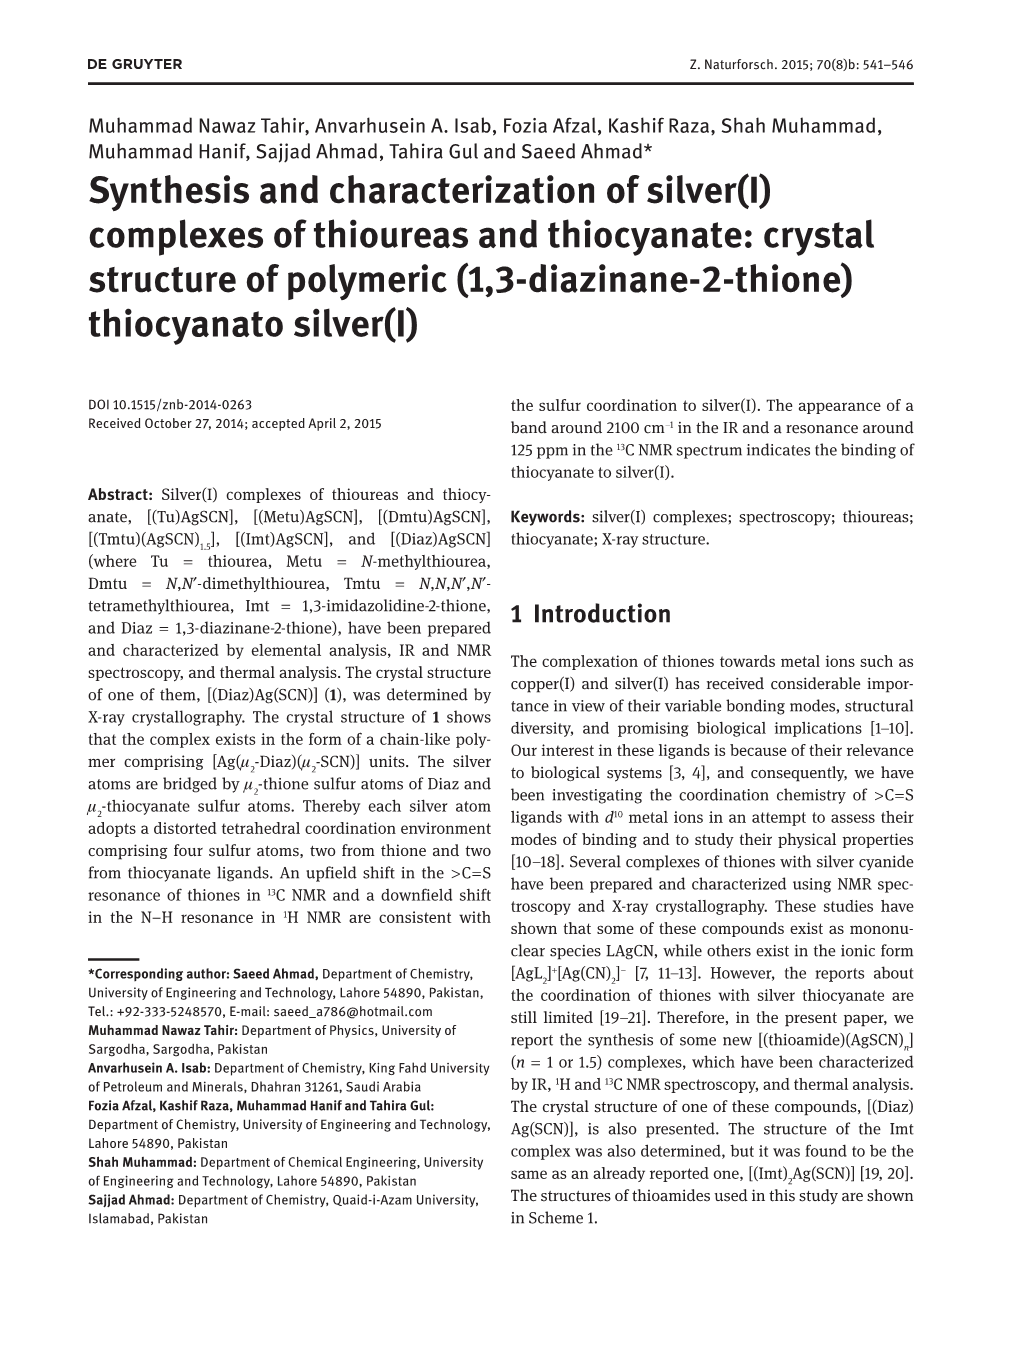 Complexes of Thioureas and Thiocyanate: Crystal Structure of Polymeric (1,3-Diazinane-2-Thione) Thiocyanato Silver(I)